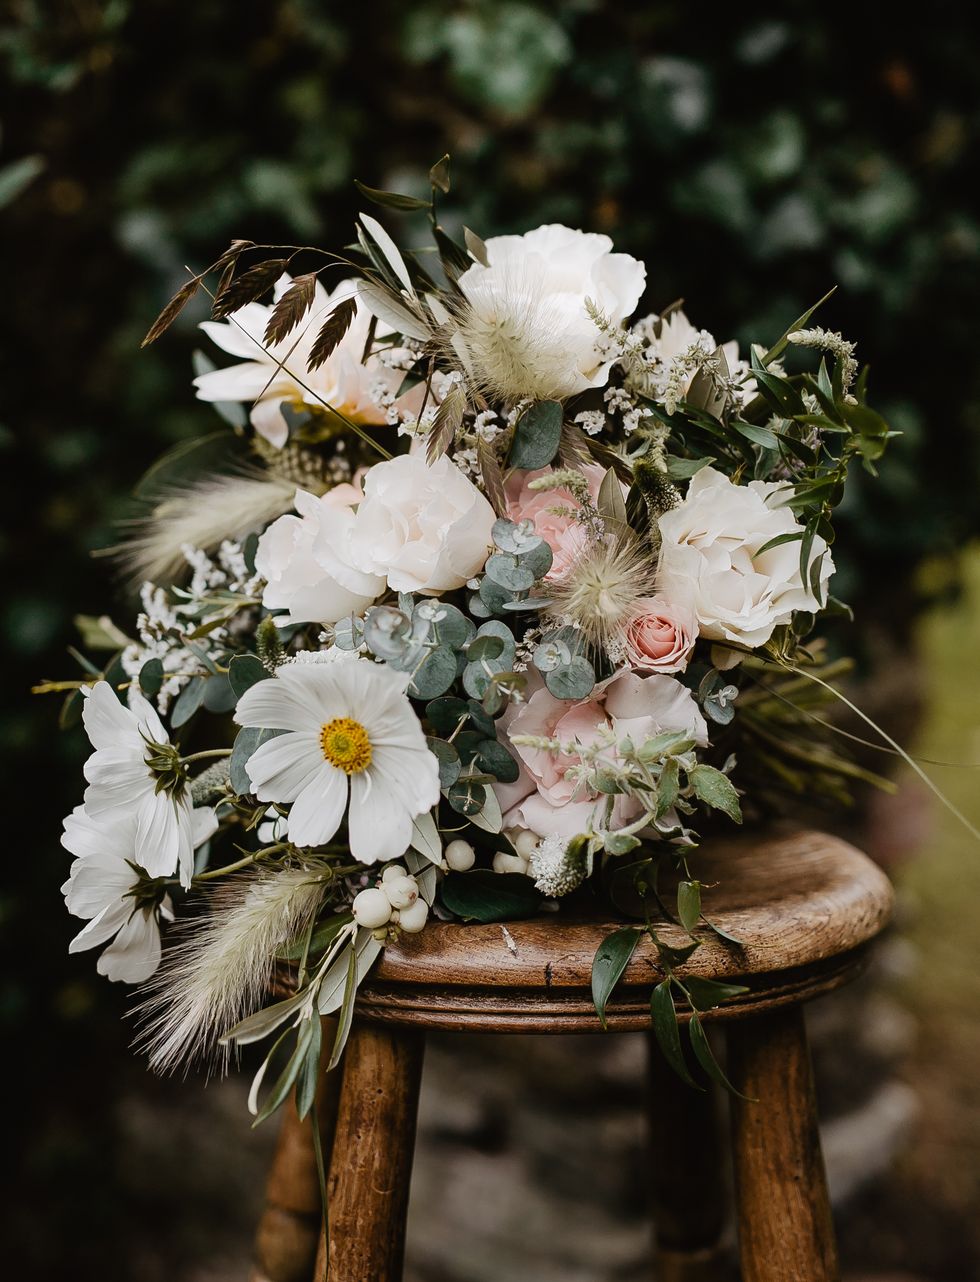 Grasses // Flowers With M // Joe Burford Photography